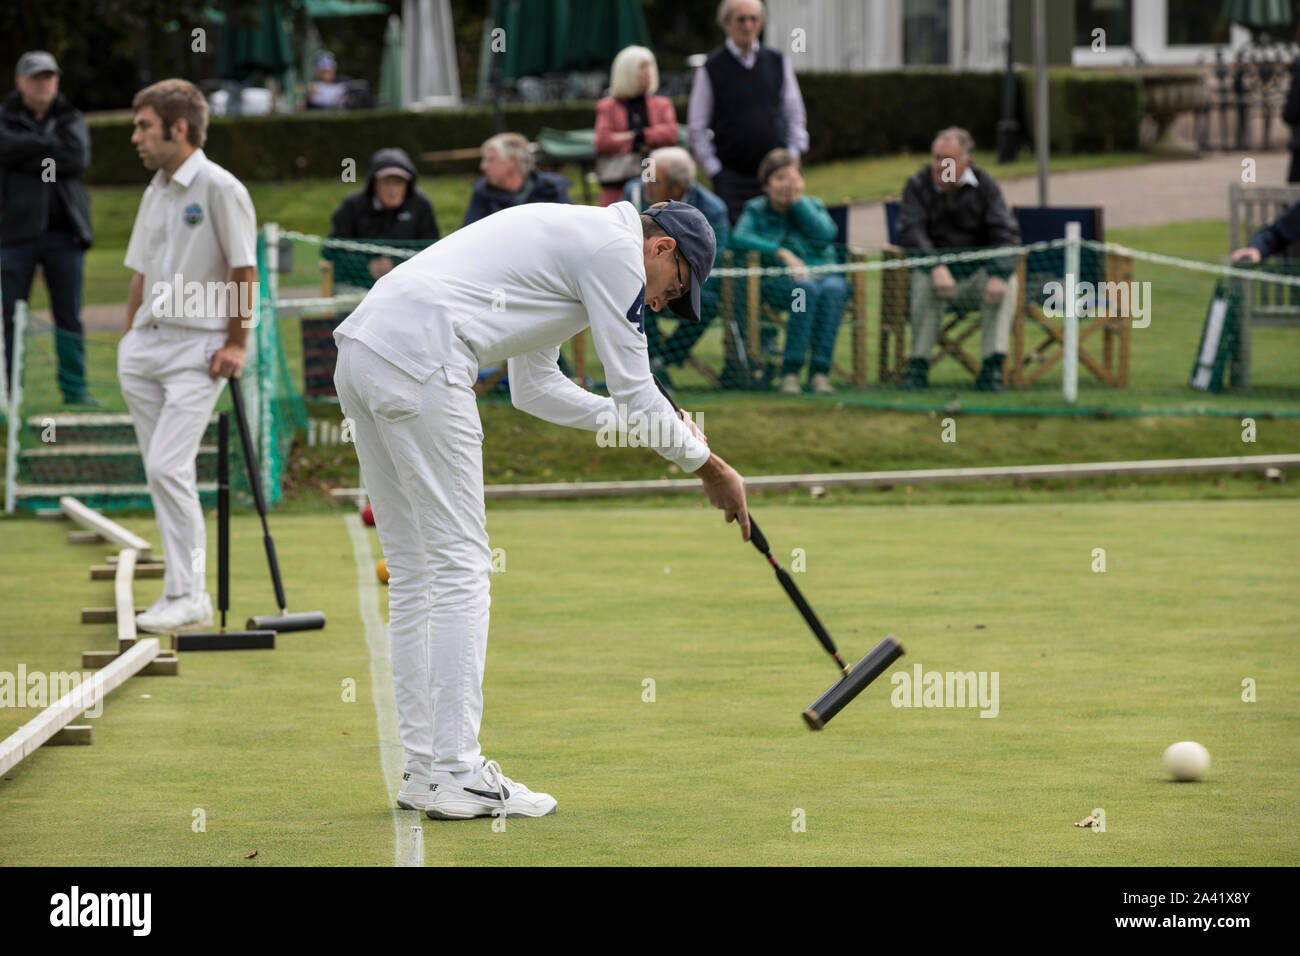 Phyllis Court V Nottingham in the National Golf Croquet Inter-Club Championship Final at Phyllis Court Club, Henley on Thames, England, UK Stock Photo